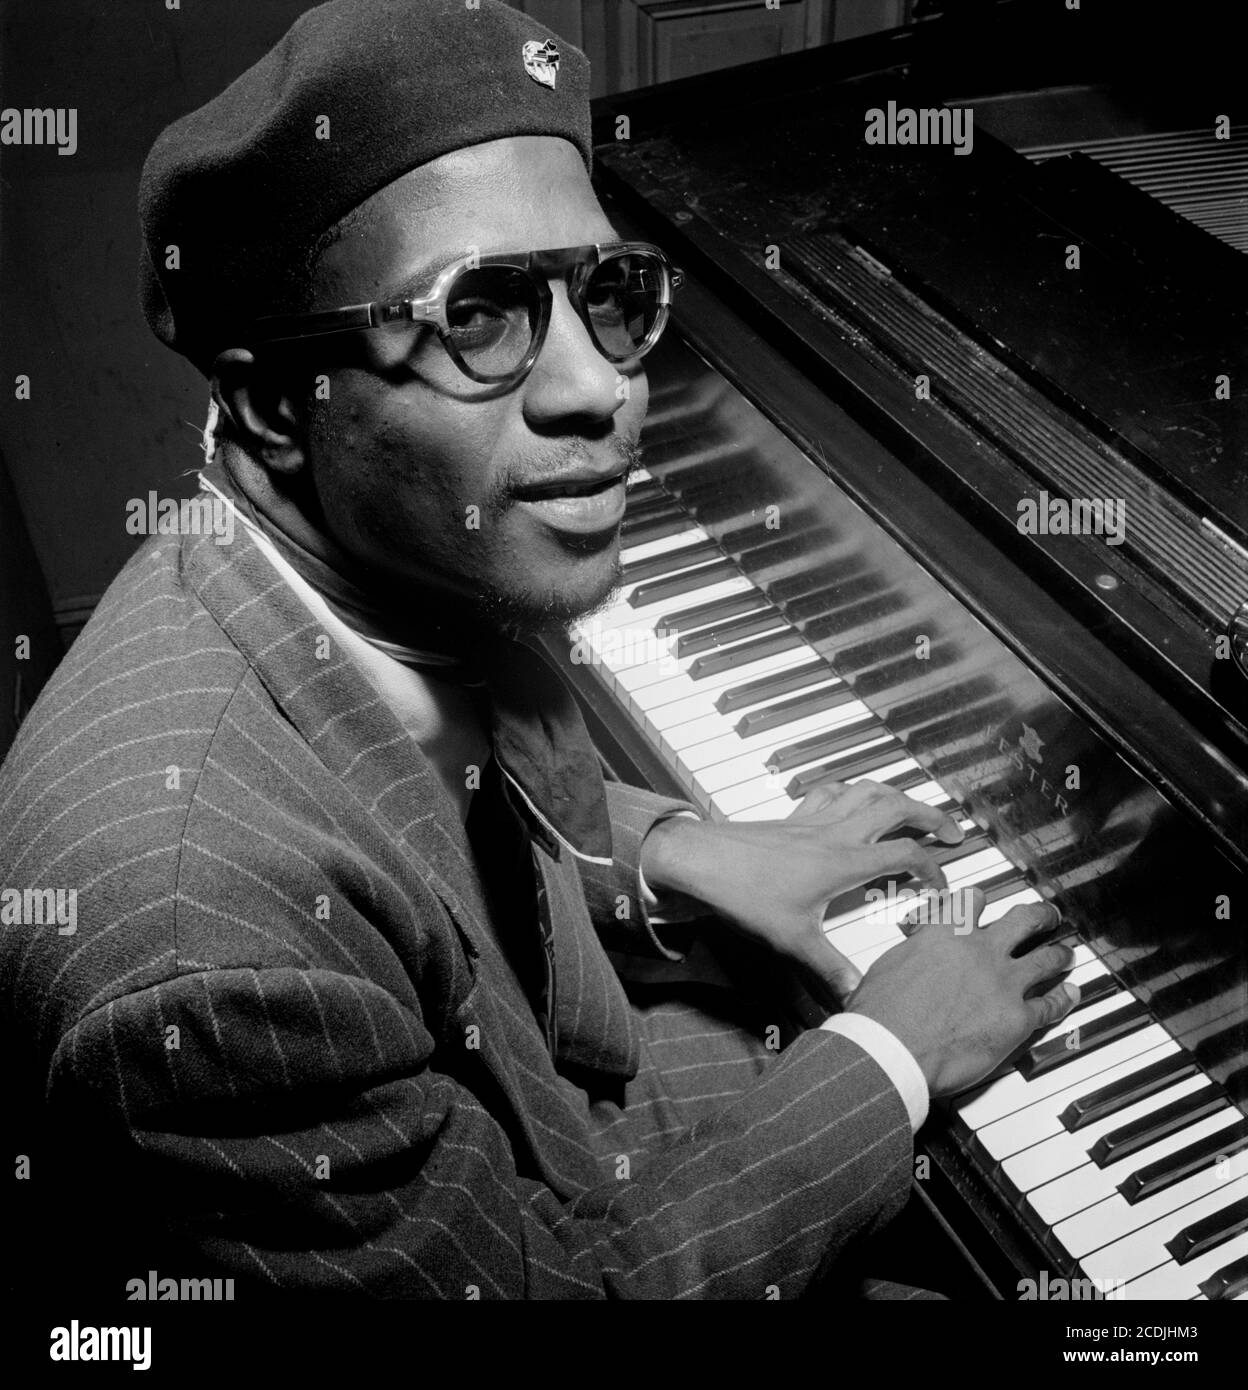 Thelonious Monk. Portrait of the American jazz pianist Thelonious Sphere Monk (1917-1982) at Minton's Playhouse, New York, c.1947 Stock Photo